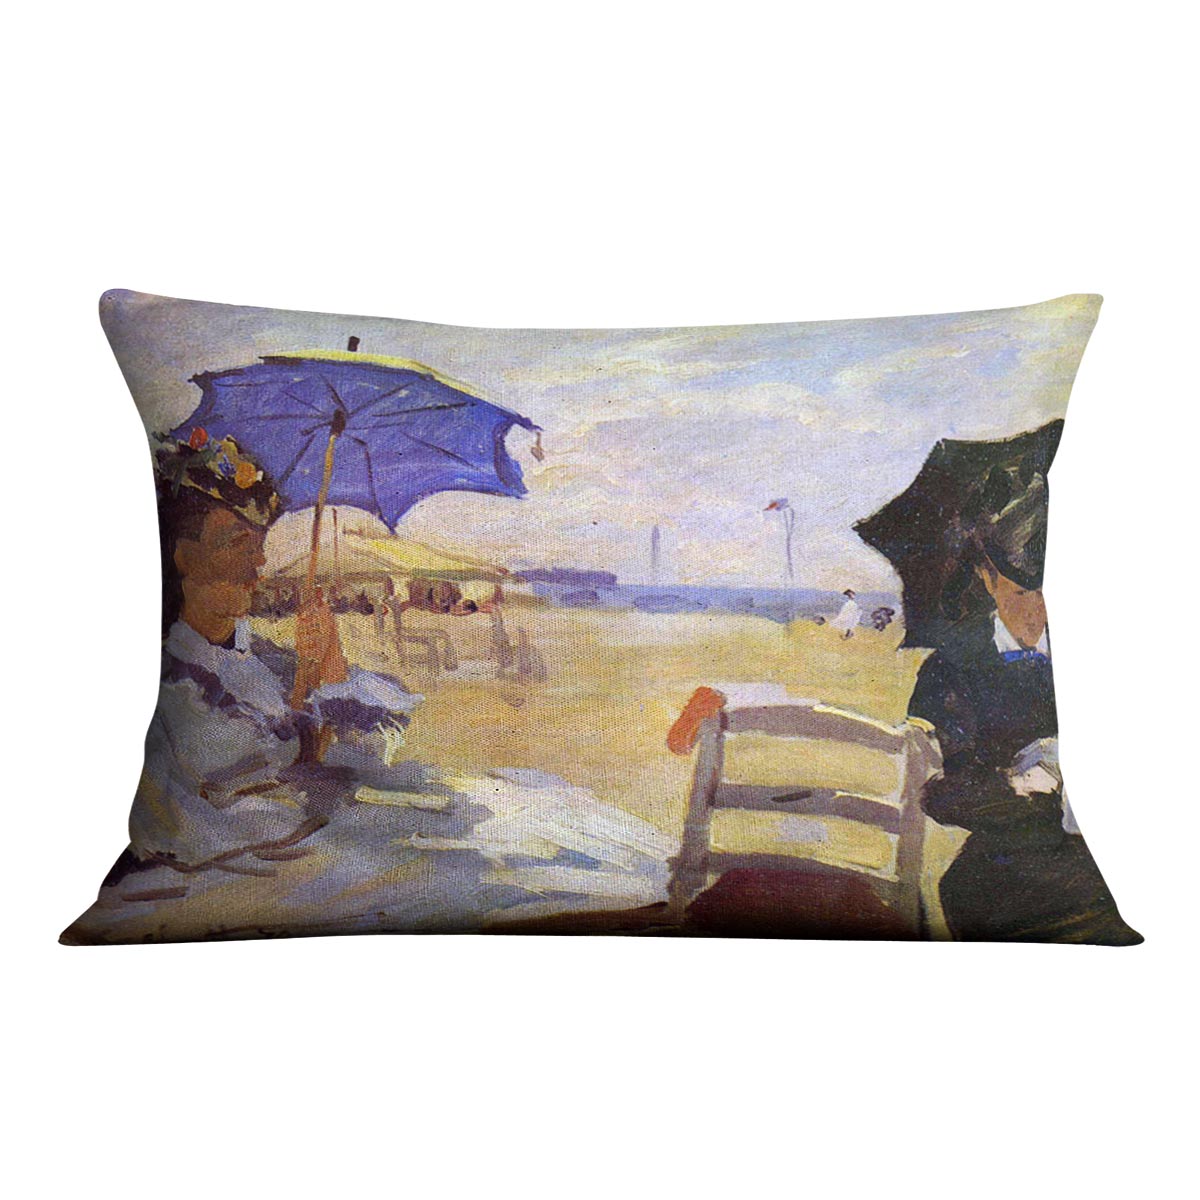 On the beach at Trouville by Monet Cushion